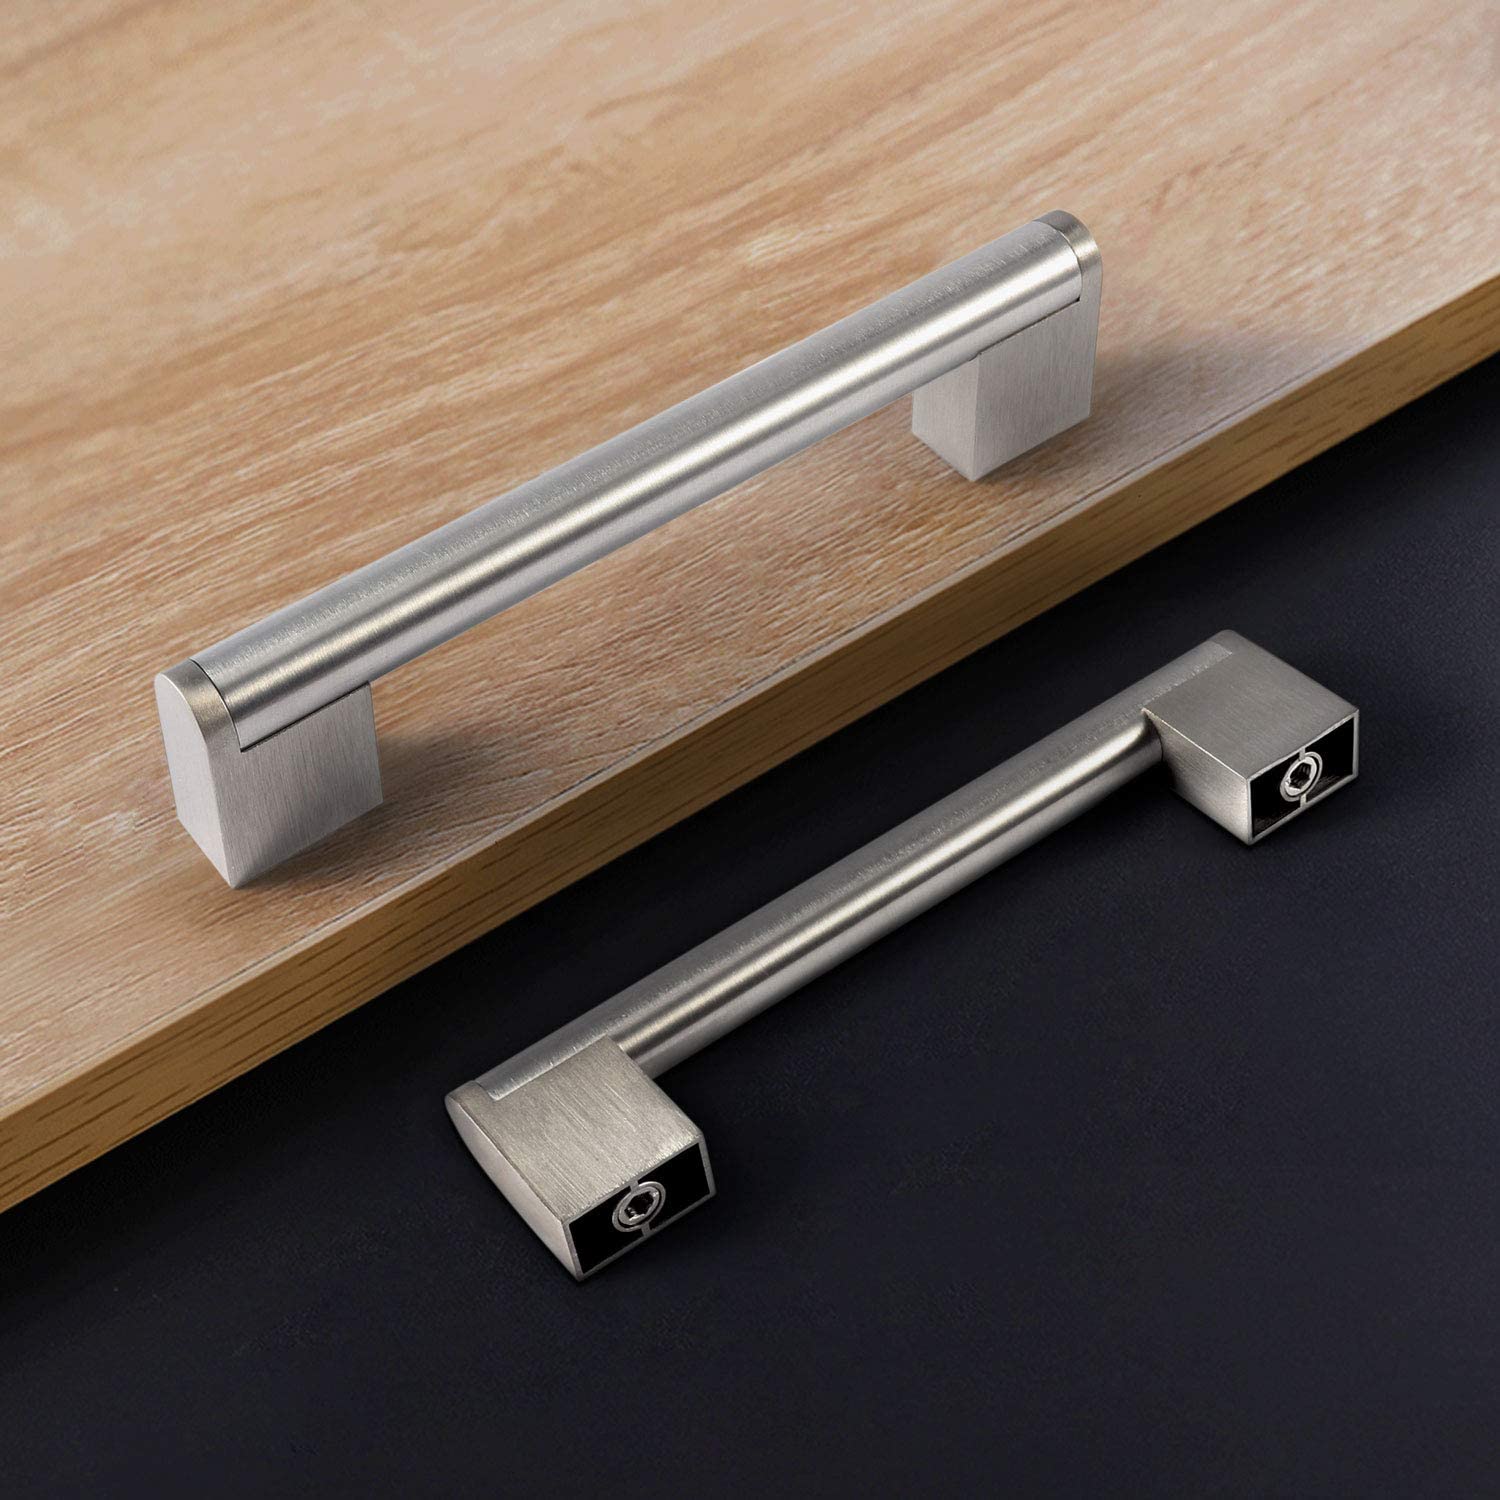 Fulgente Brushed Chrome Drawer Pulls, 5-Inch Hole Center 10-Pack Stainless Steel Cabinet Handles.